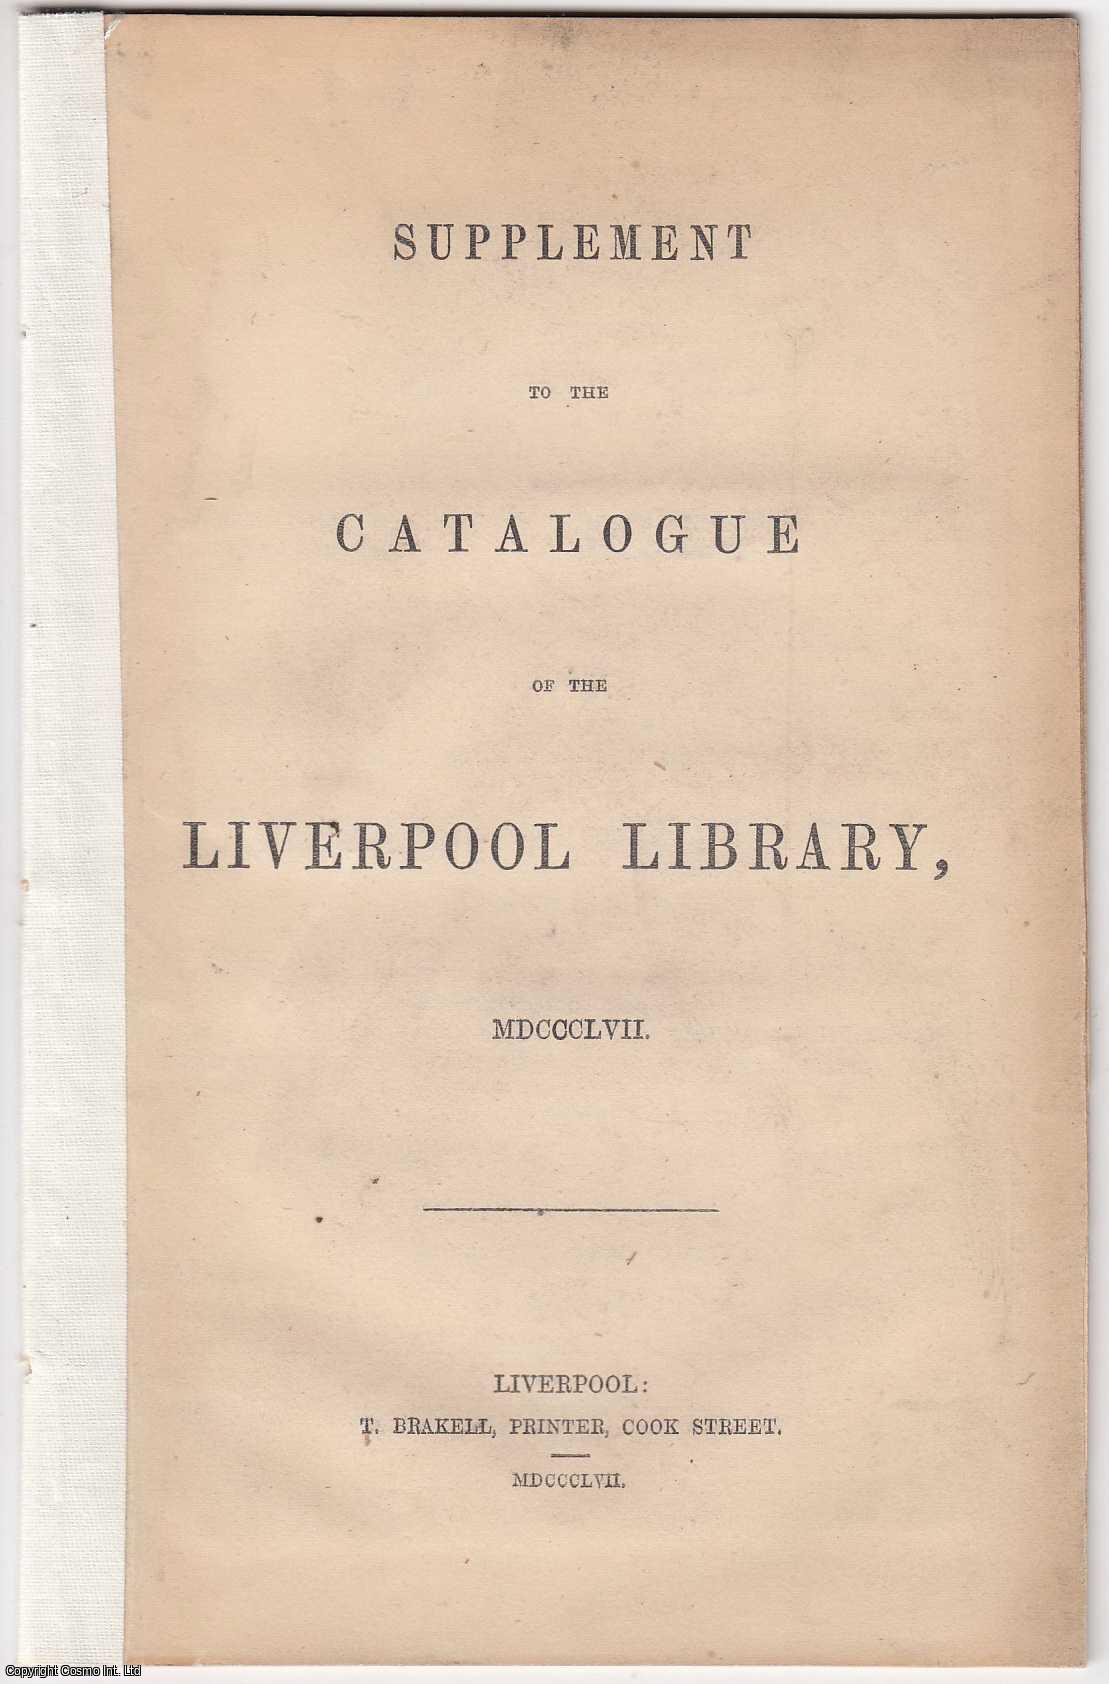 --- - [1857] Supplement to the Catalogue of the Liverpool Library, 1857.